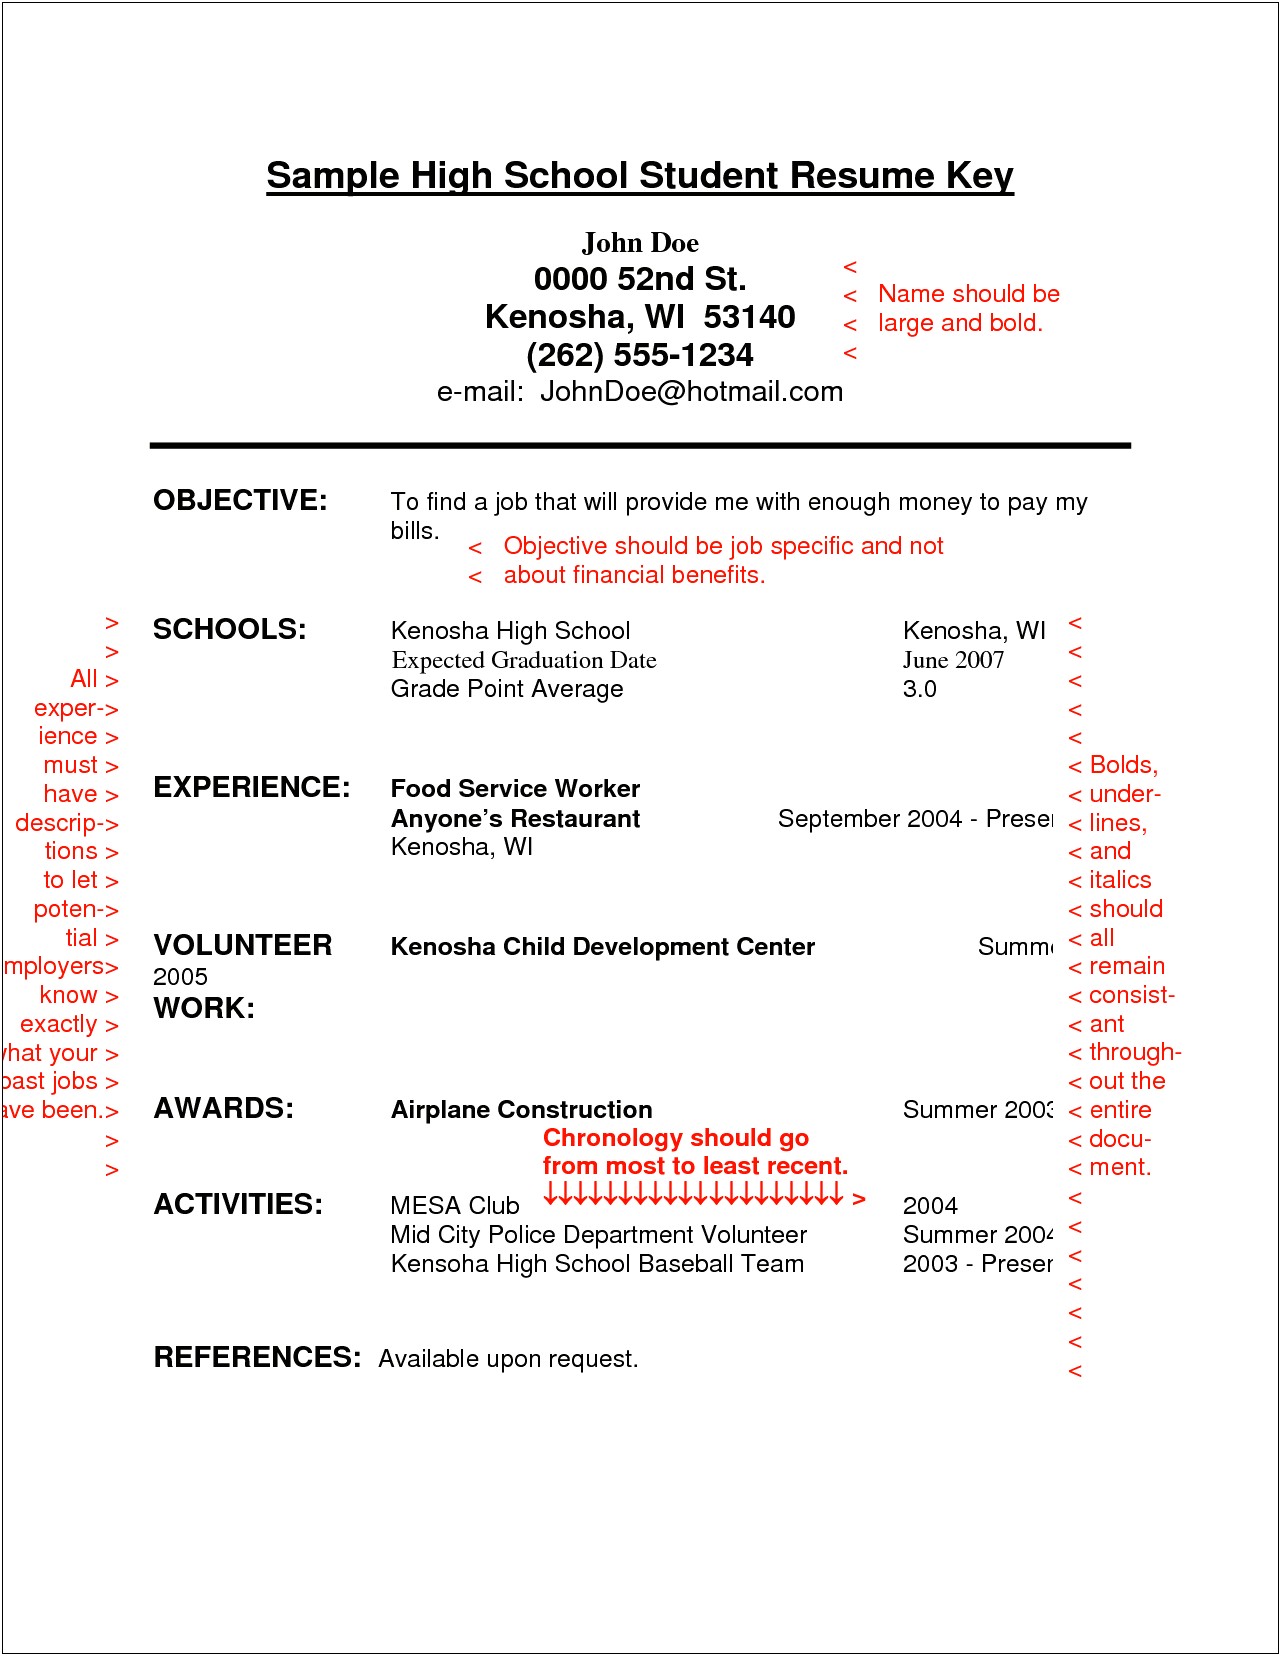 A Basic Resume For Students In High School